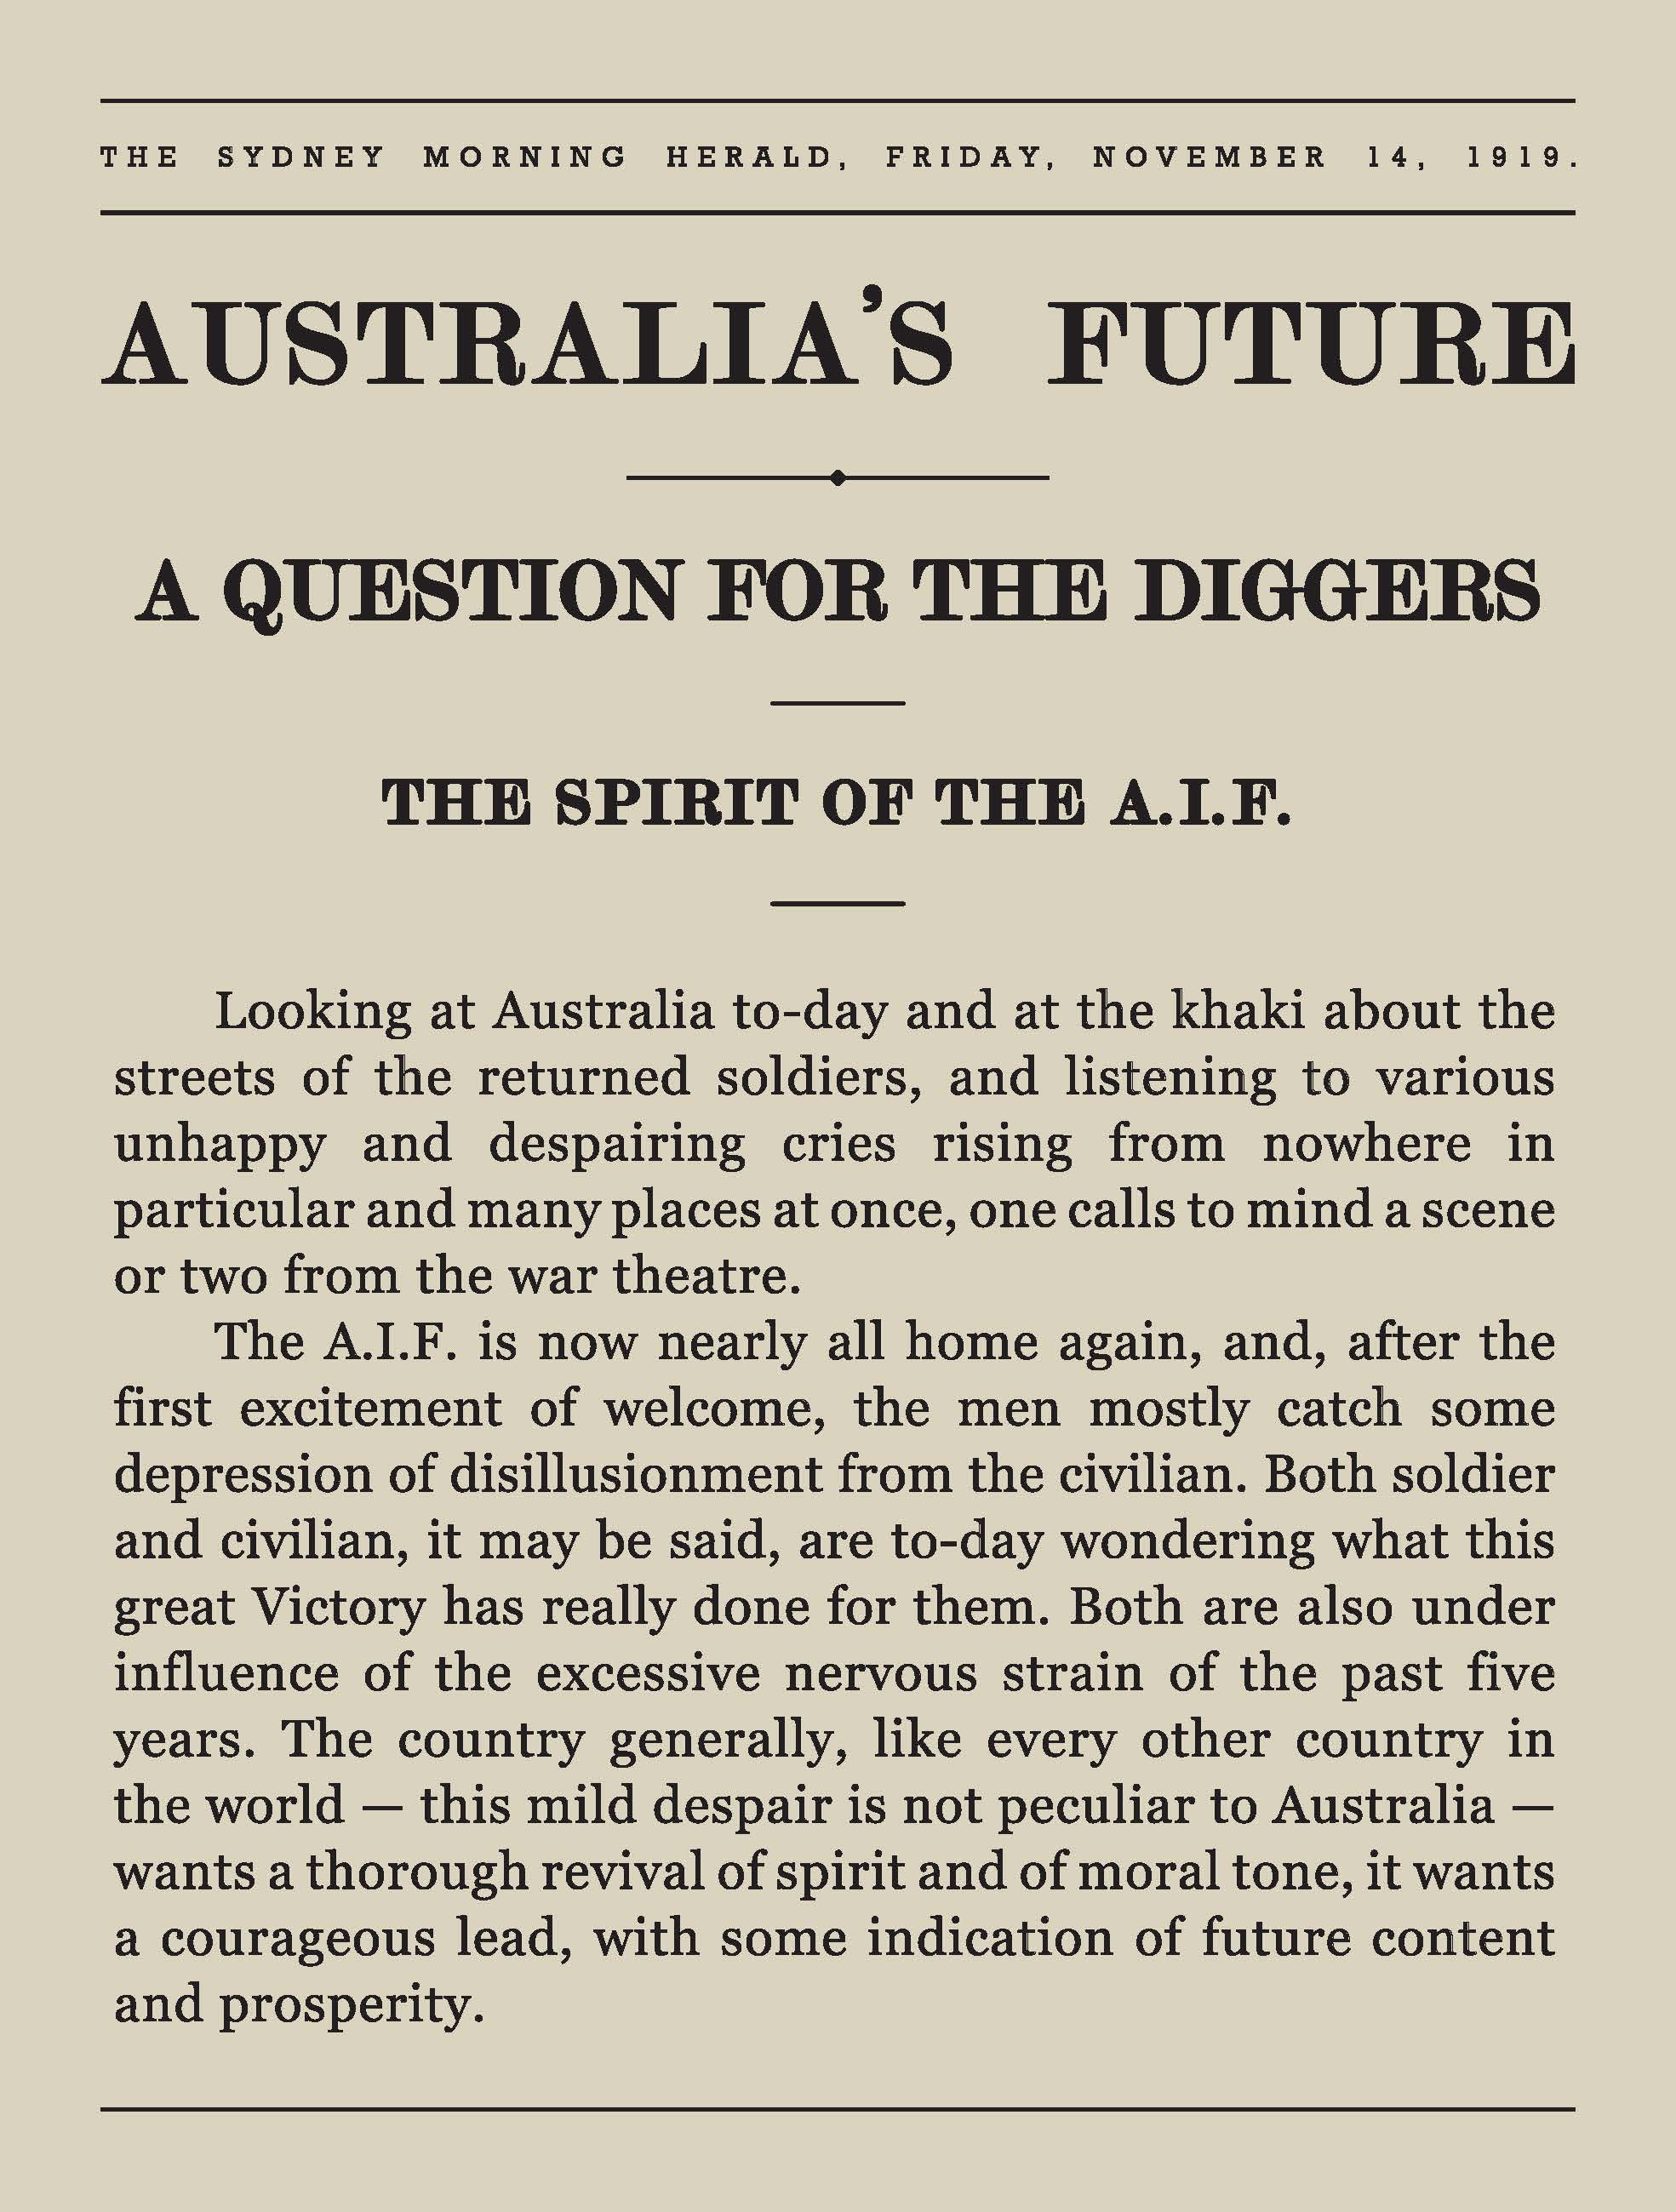 Article's title: "Australia's future, a question for the diggers" The article goes on to  say:  "Both soldier and civilian... are to-day wondering what this great Victory has really done for them...